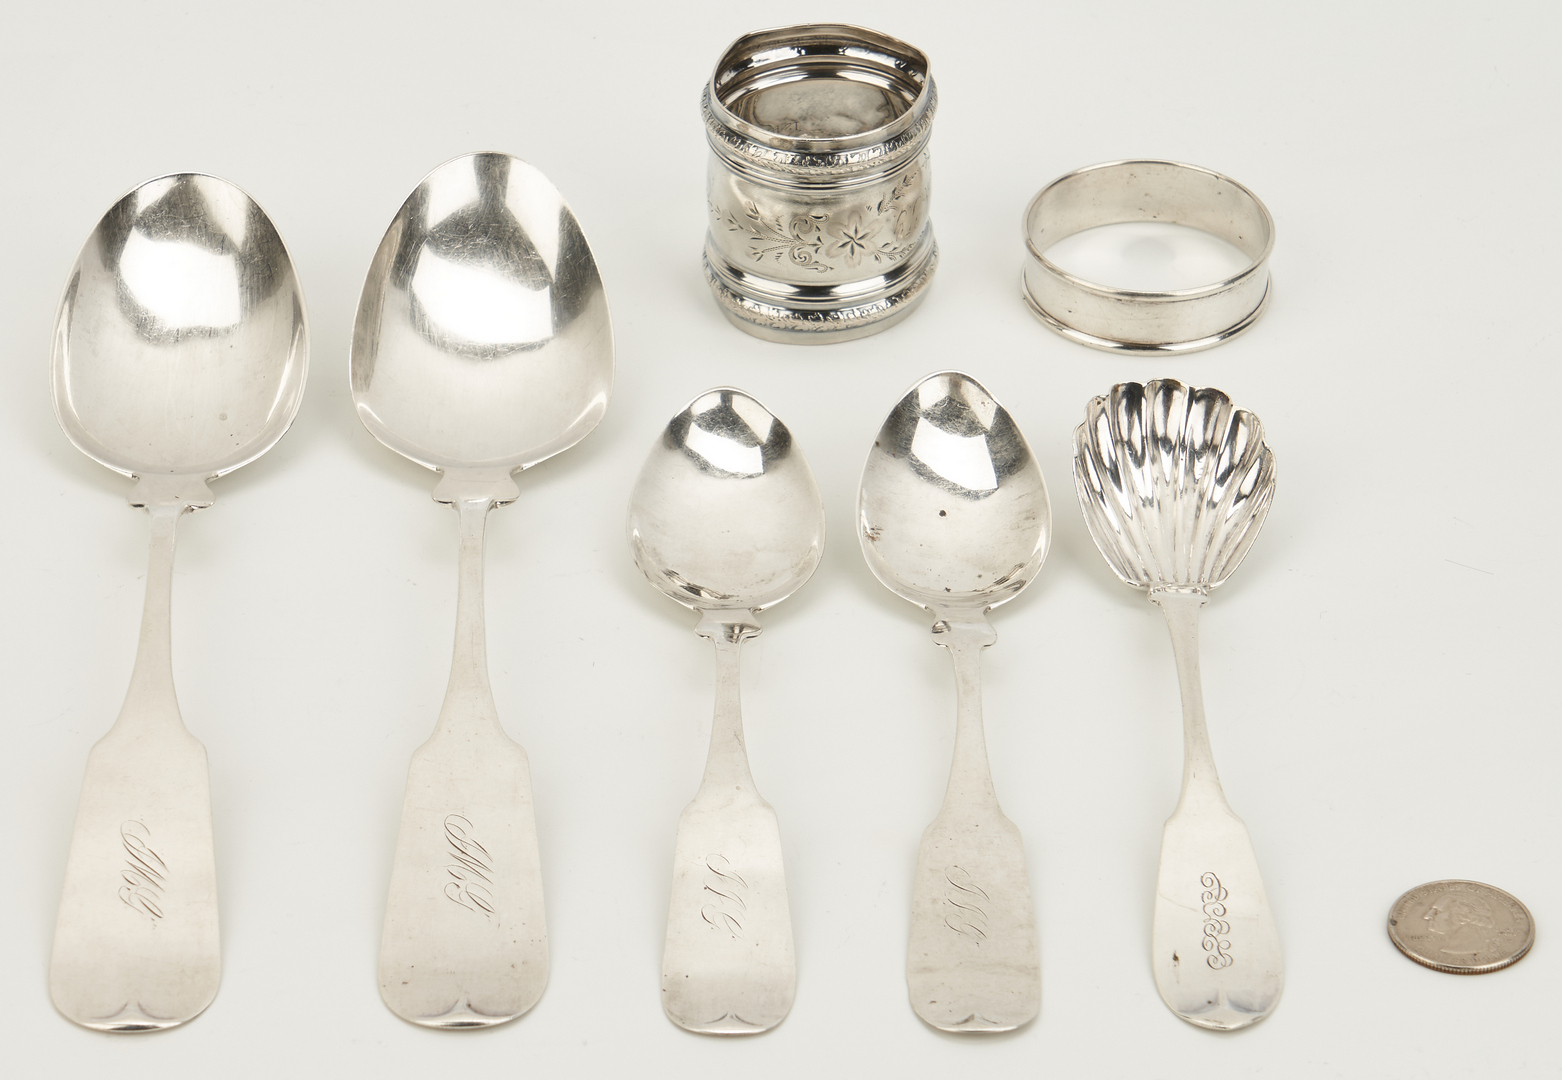 Lot 85: 5 Coin Silver Spoons incl. TN, plus 2 Napkin Rings